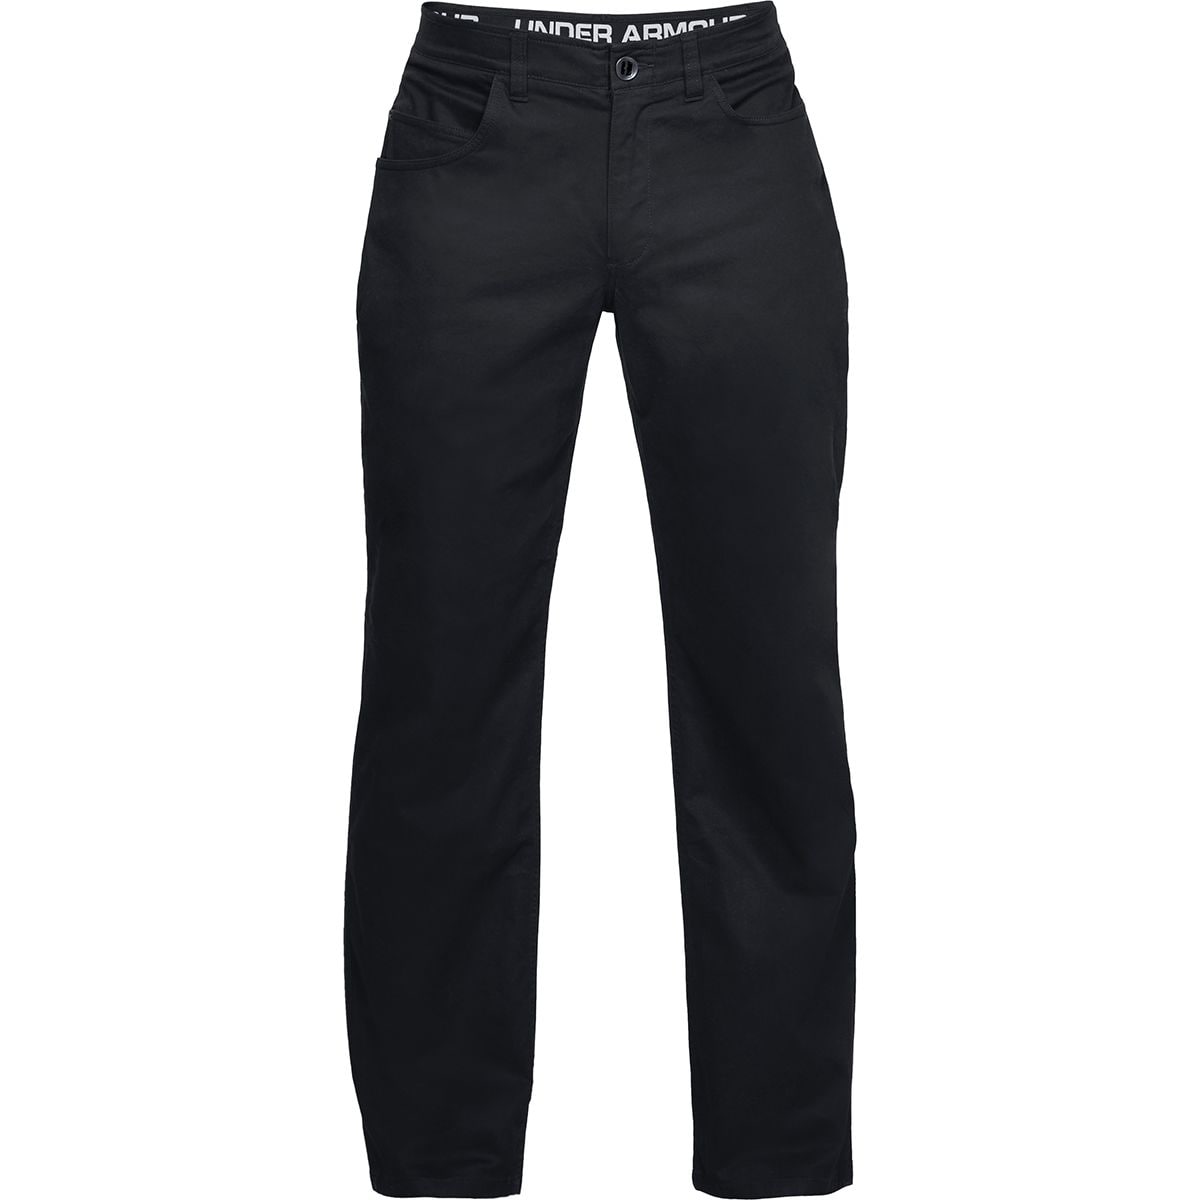 Under Armour Payload Pant - Men's - Clothing